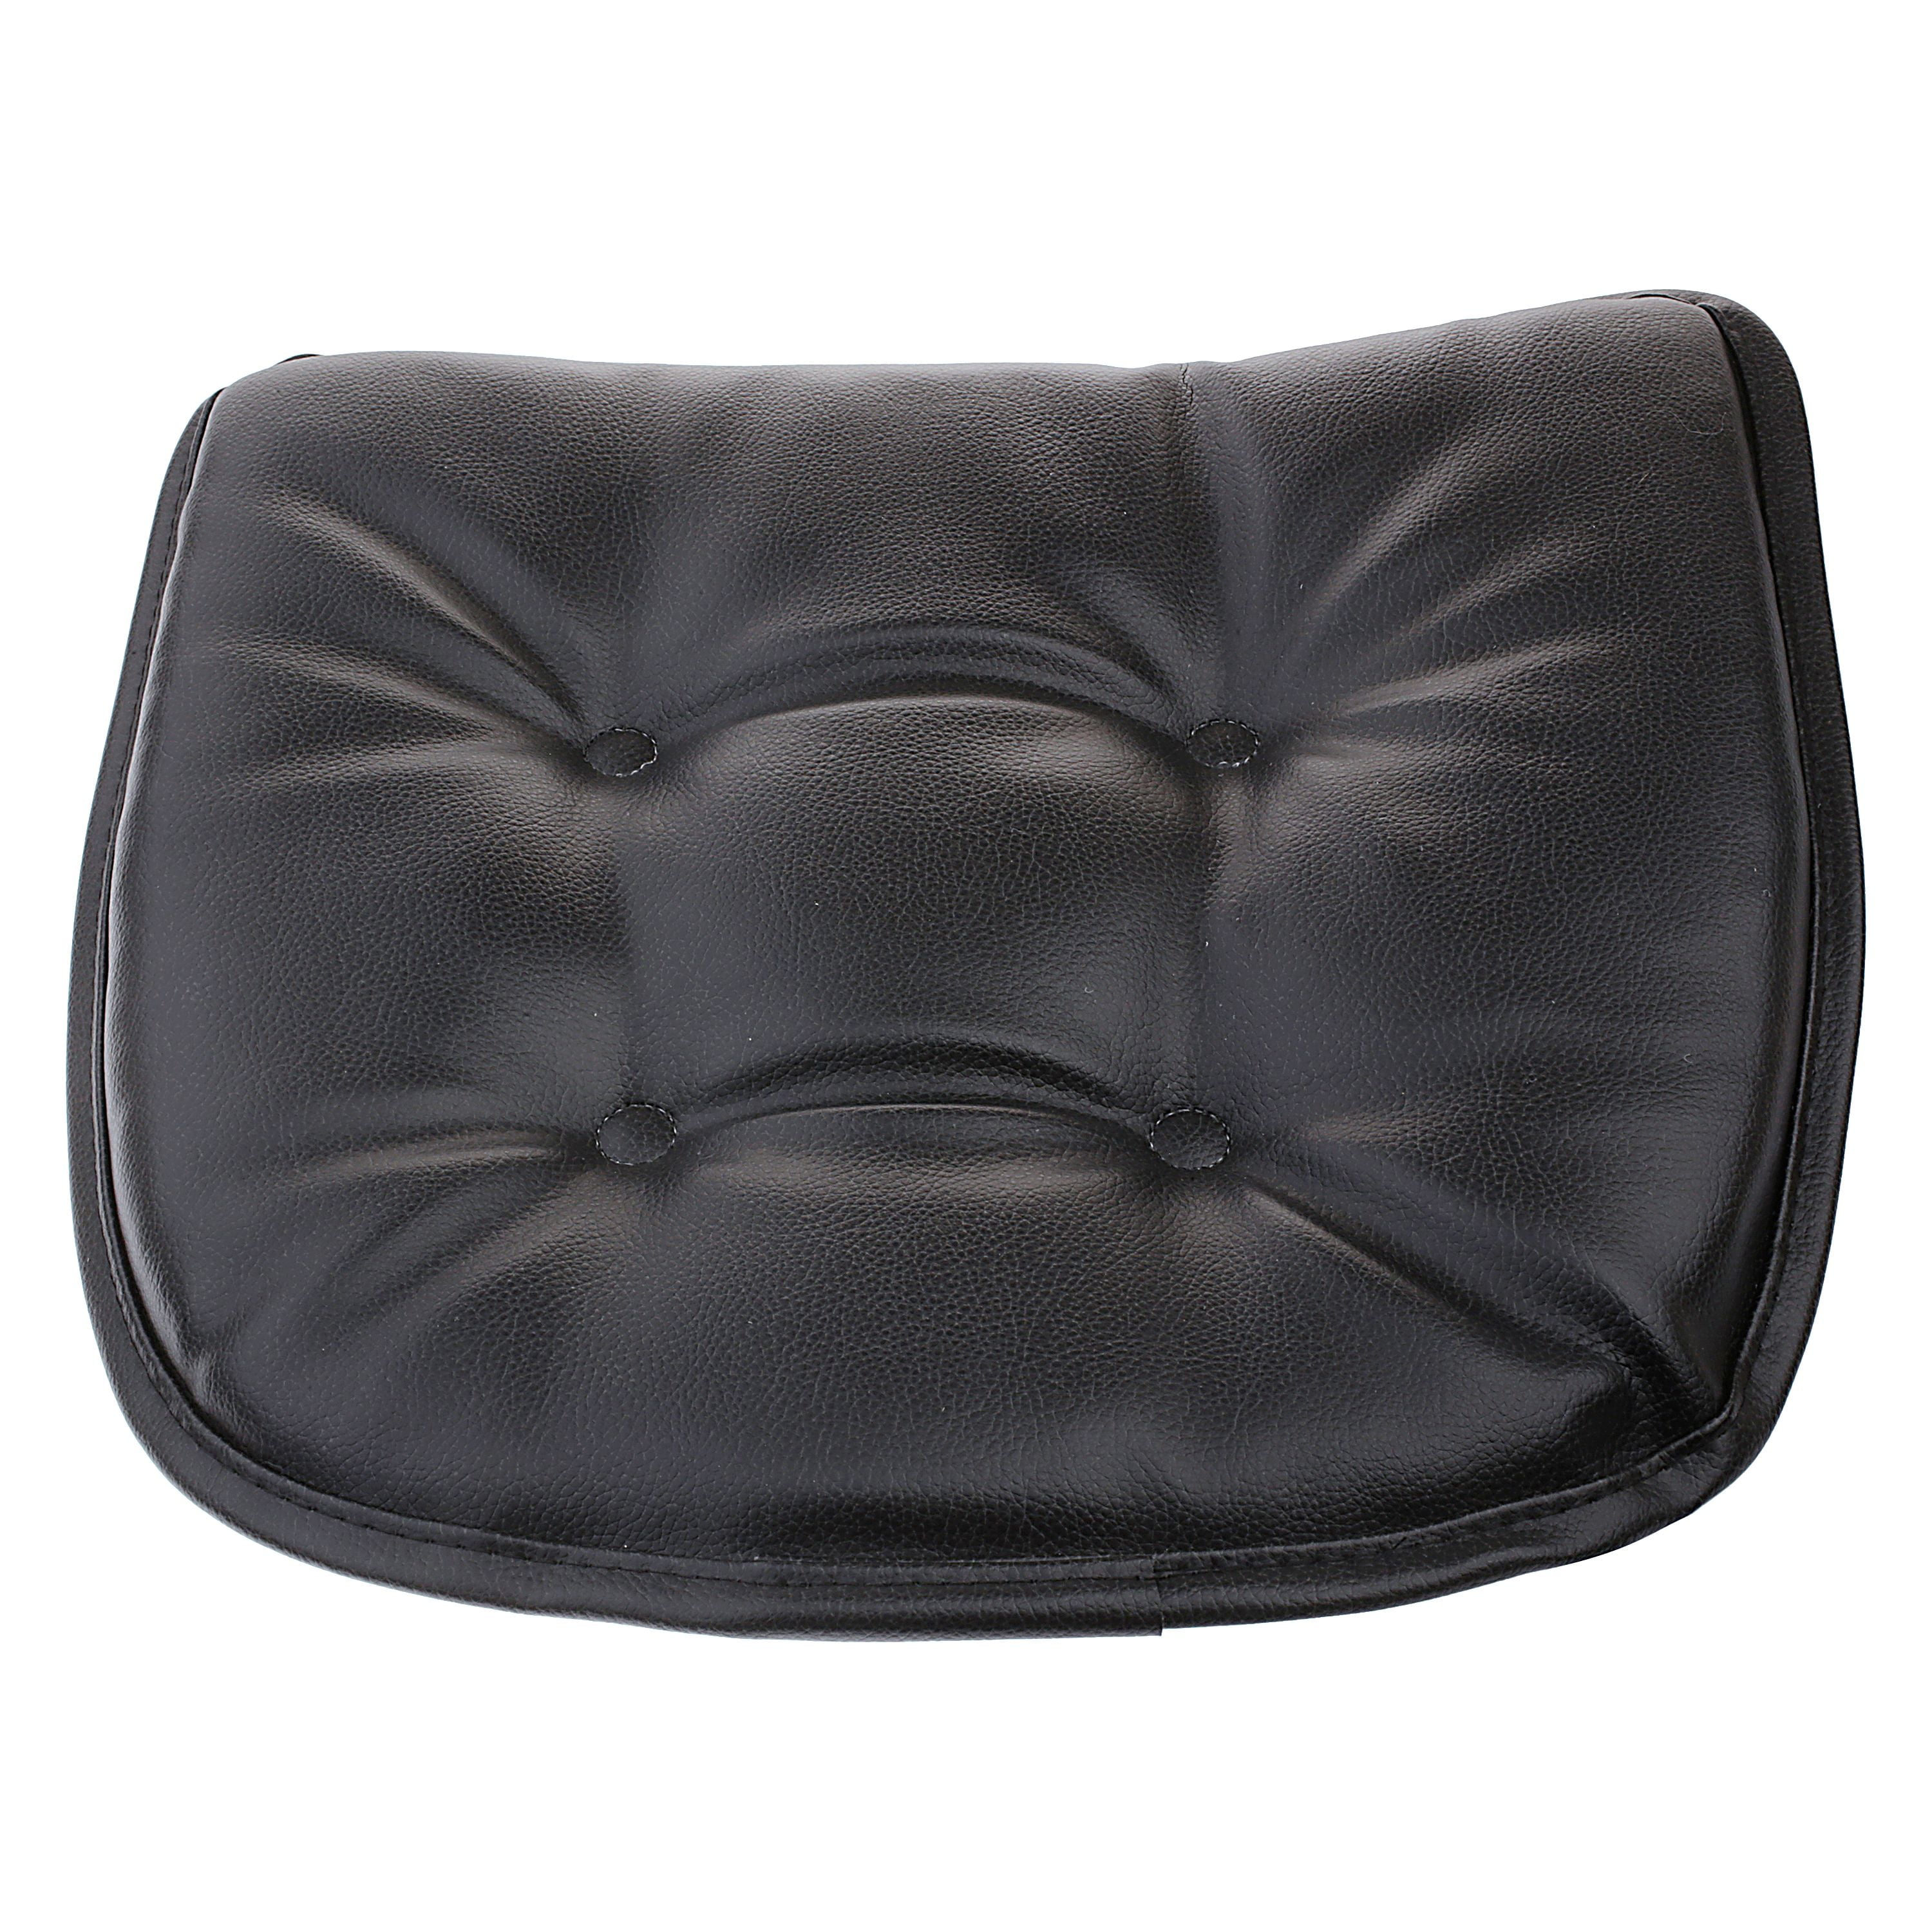 Faux Leather Black Chair Cushion, Faux Leather Dining Chair Cushions